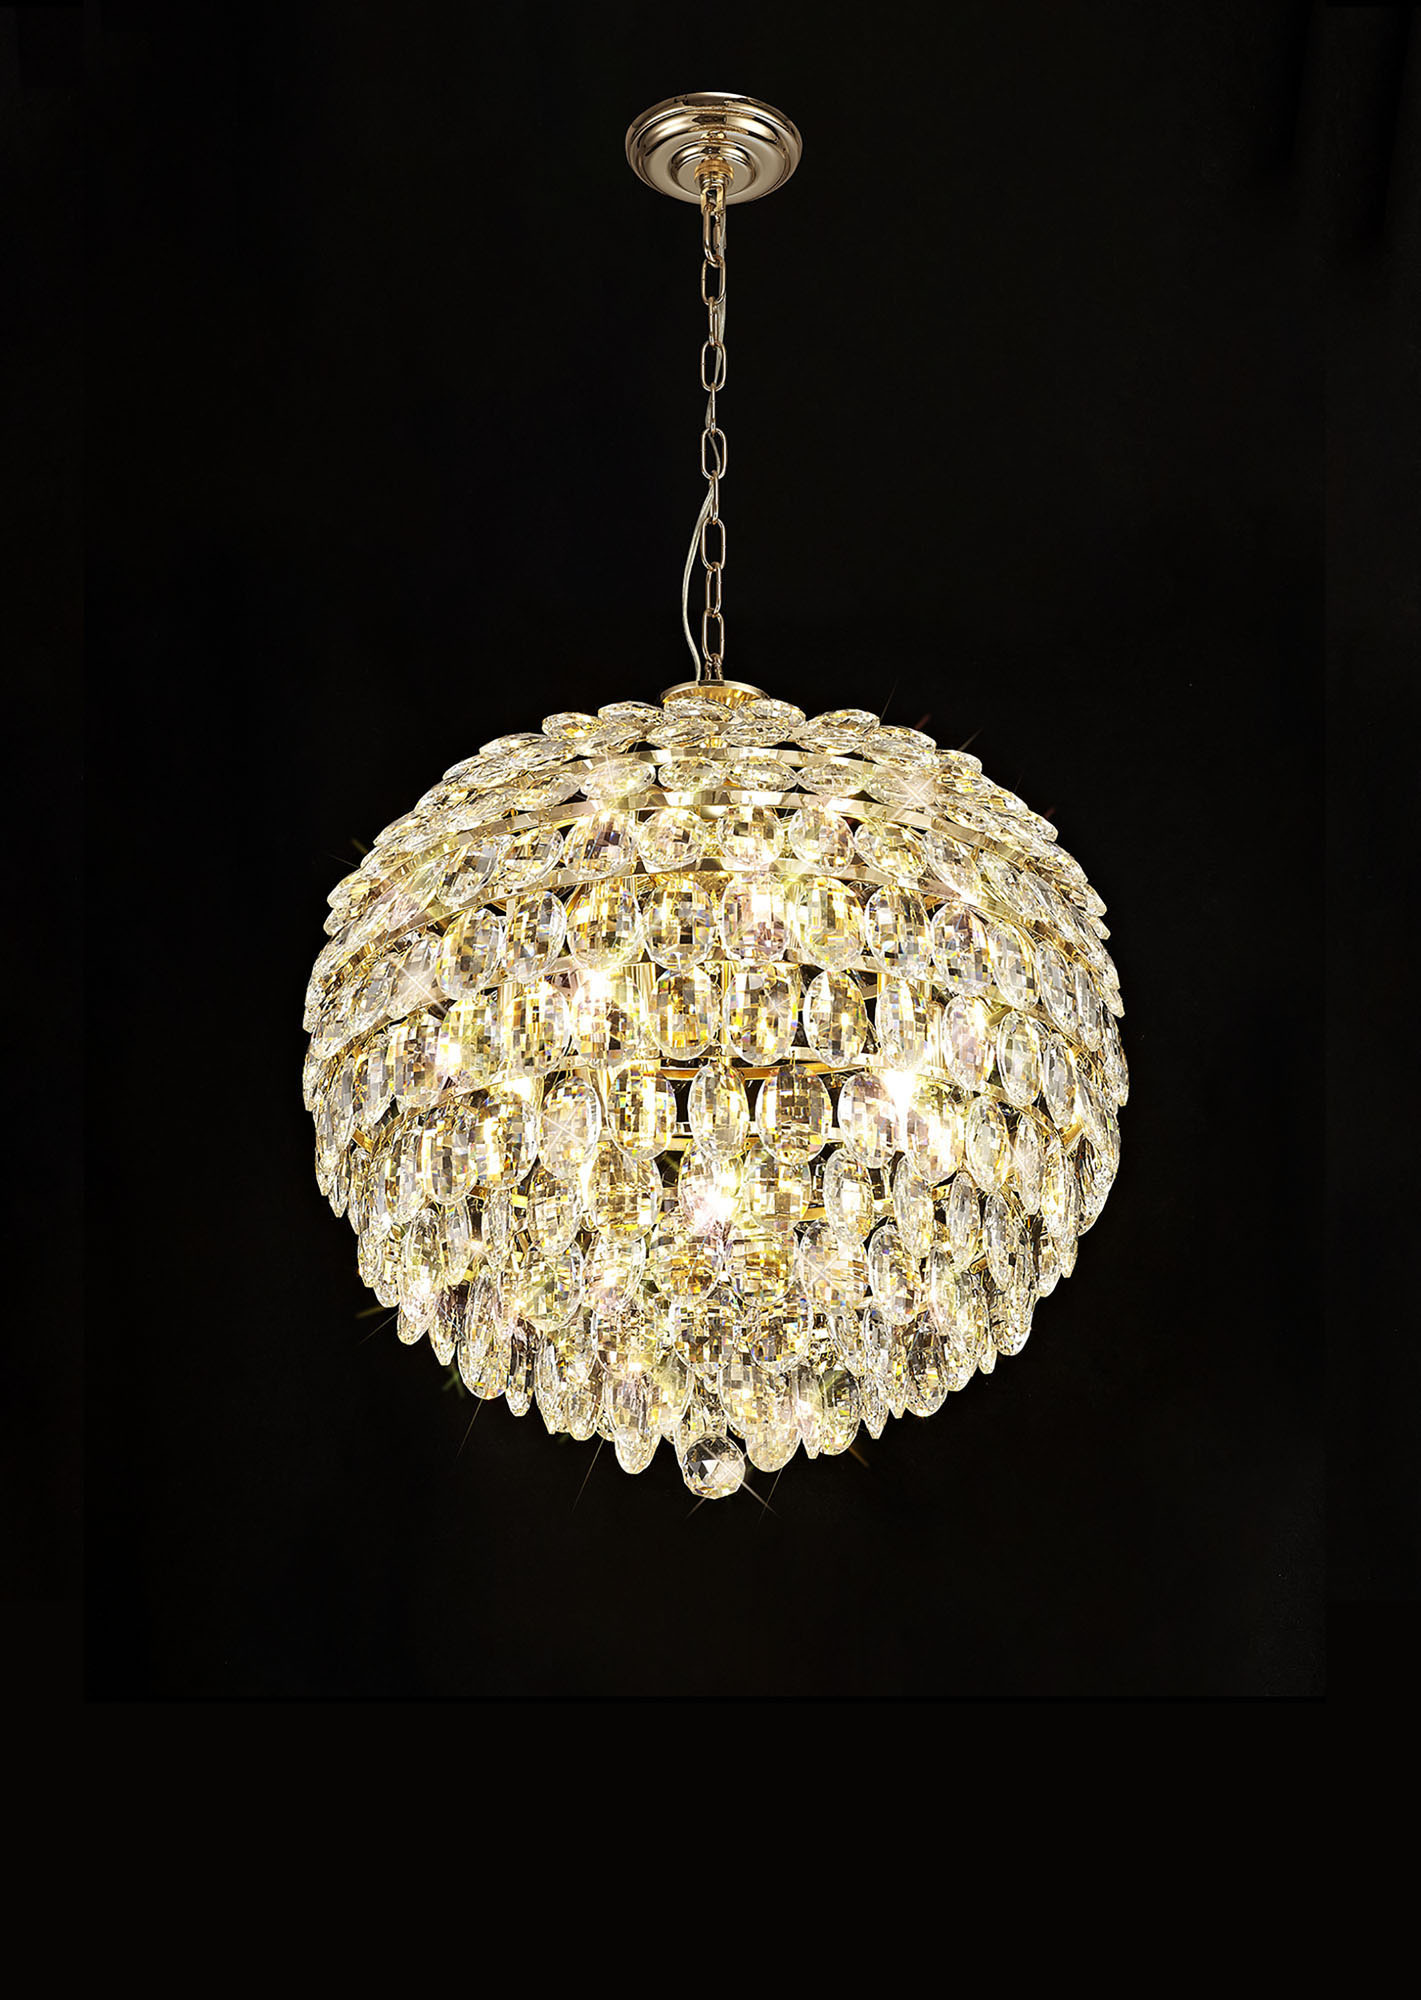 Coniston French Gold Crystal Ceiling Lights Diyas Spherical Crystal Fittings